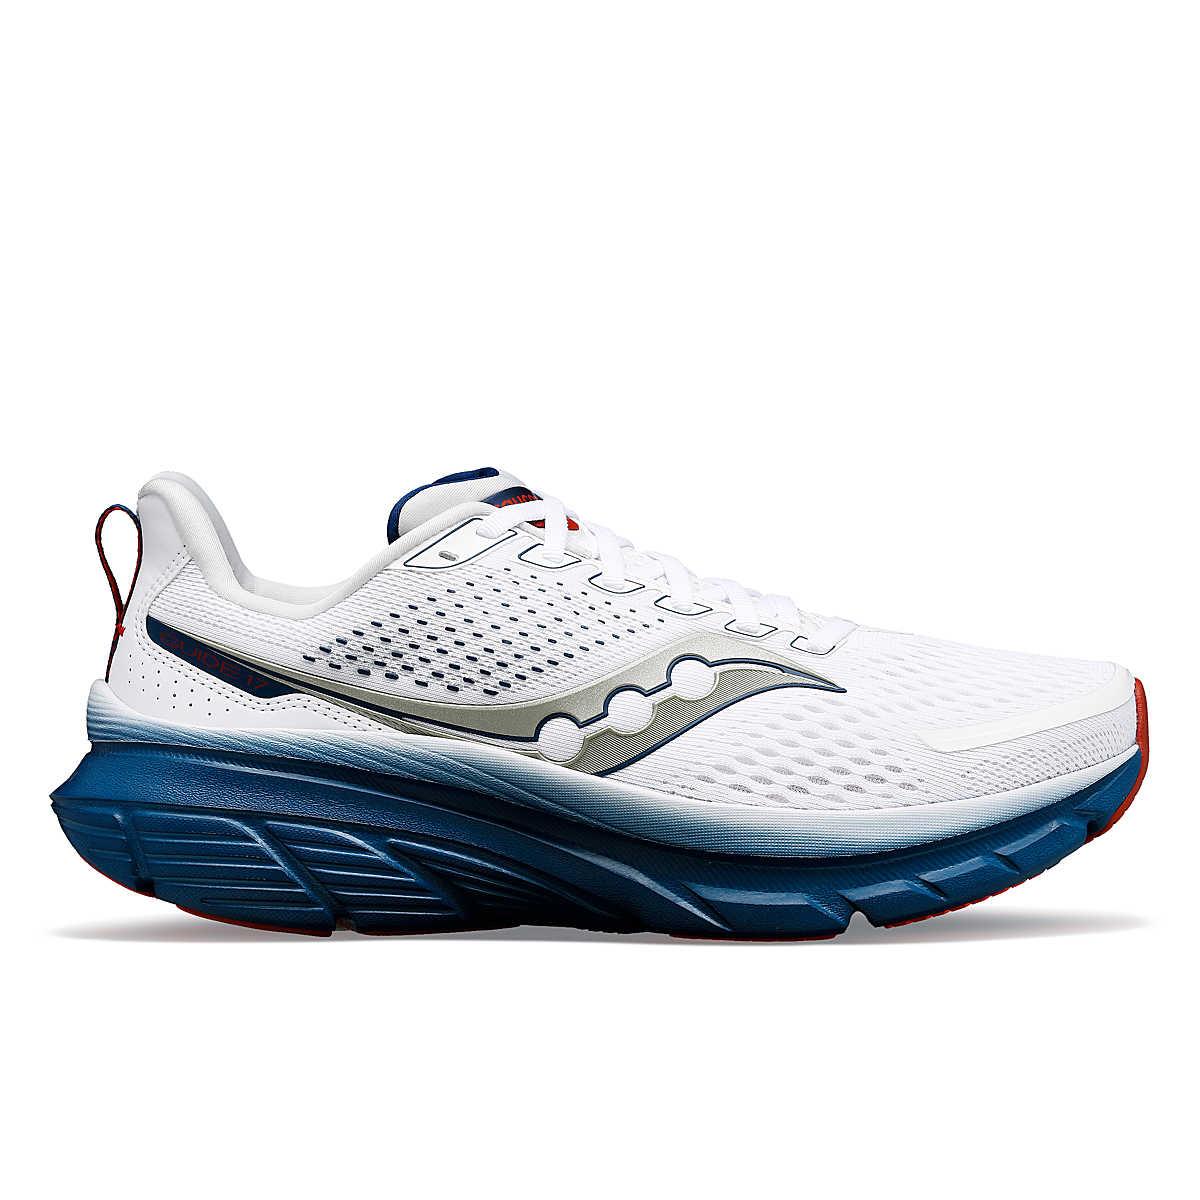 Saucony - Saucony Men's Guide 17 Running Shoe - The Shoe Collective